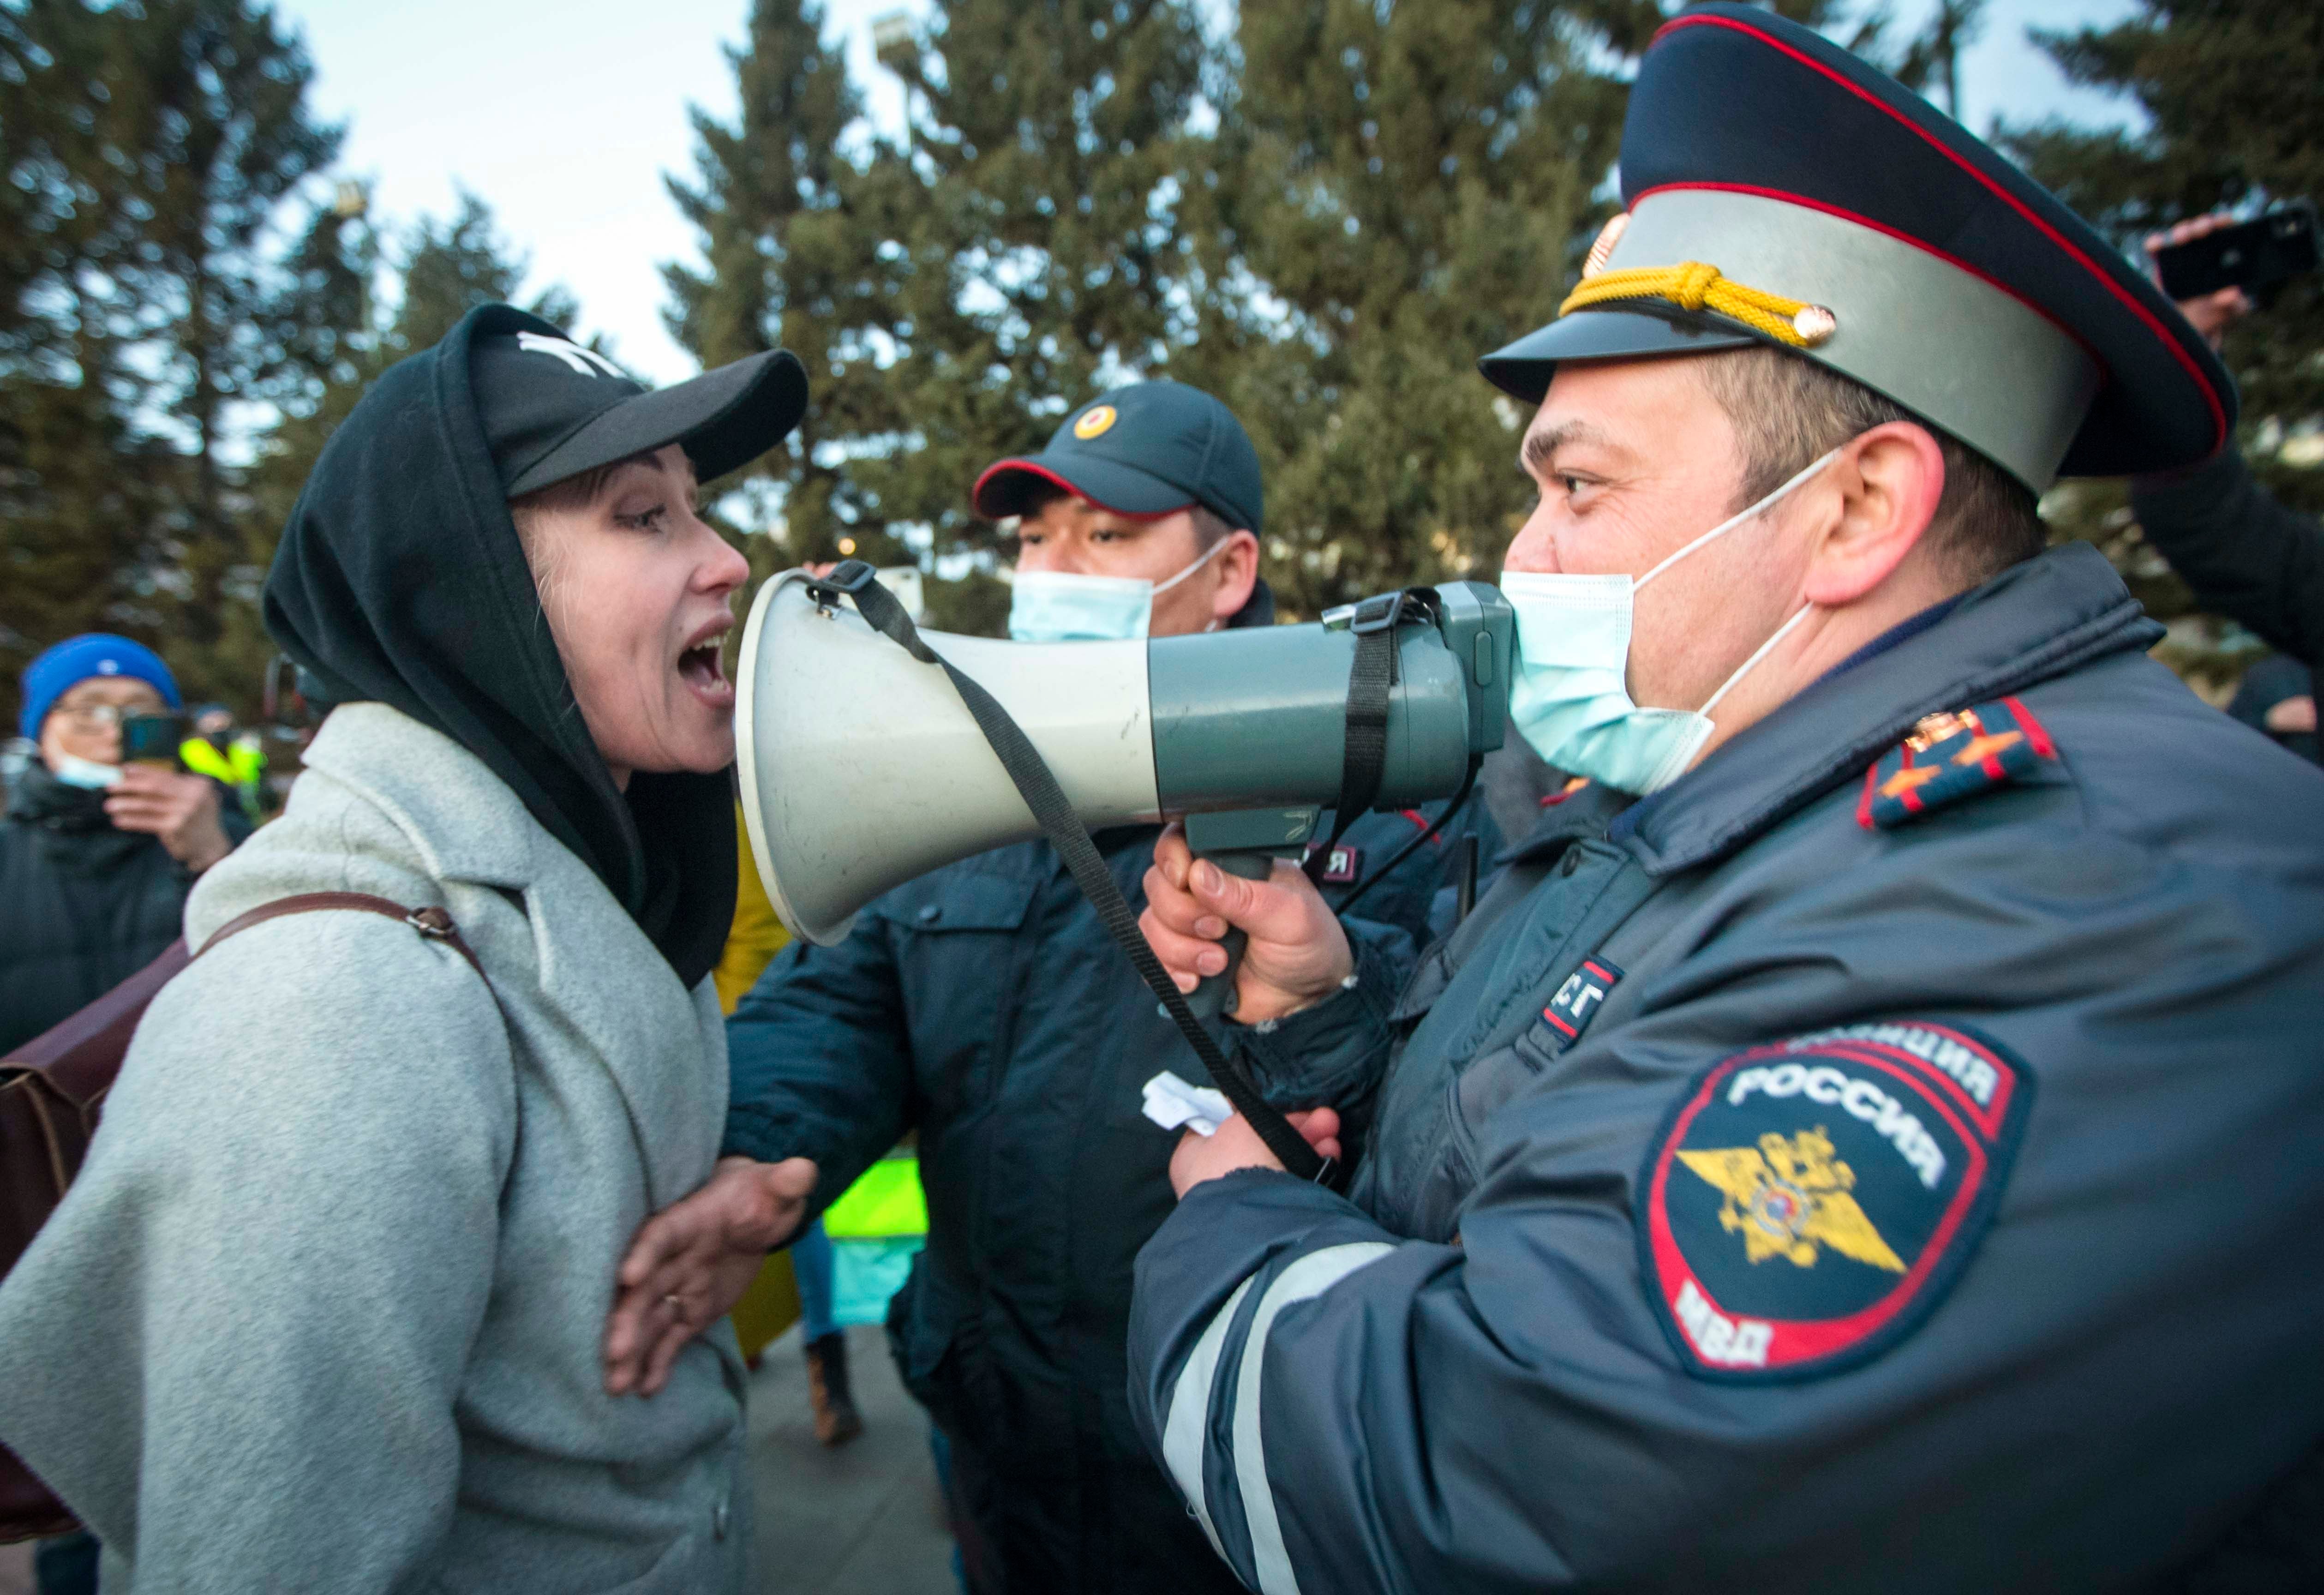 A woman argues with a police officer during a protest in support of jailed opposition leader Alexei Navalny in Ulan-Ude, Russia, April 21, 2021.